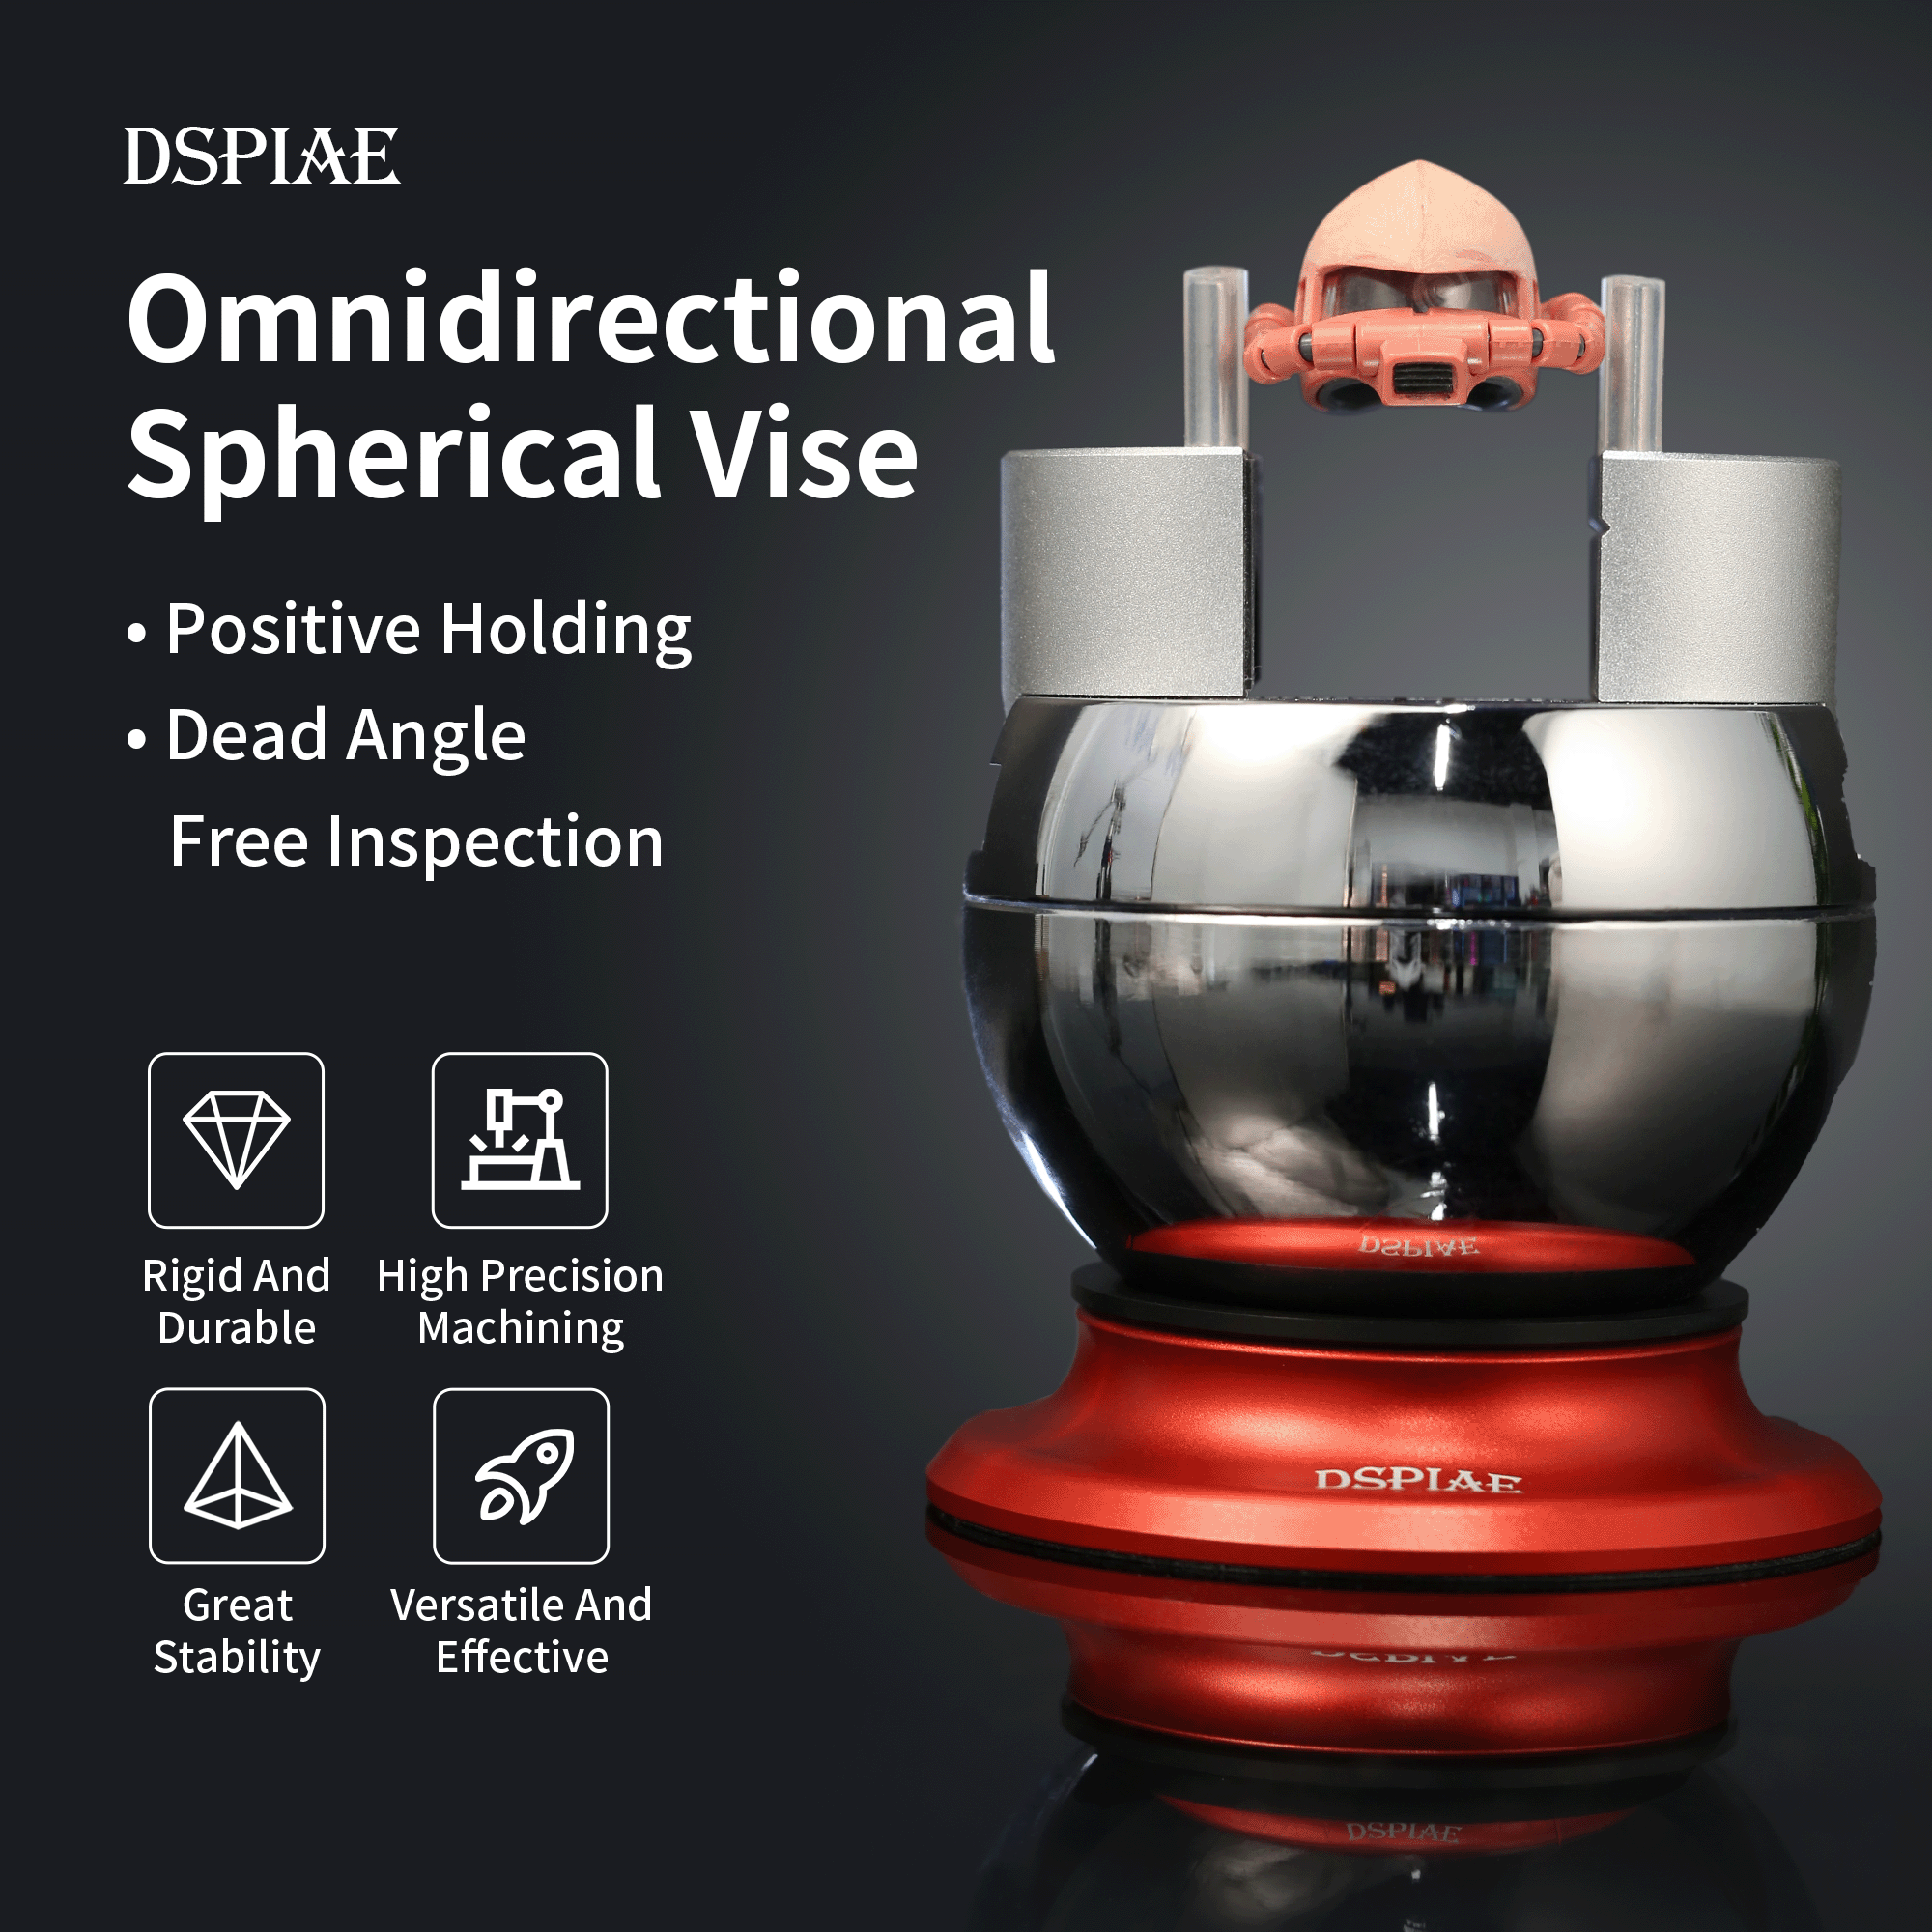 Dspiae AT-SV Omnidirectional Spherical Vise